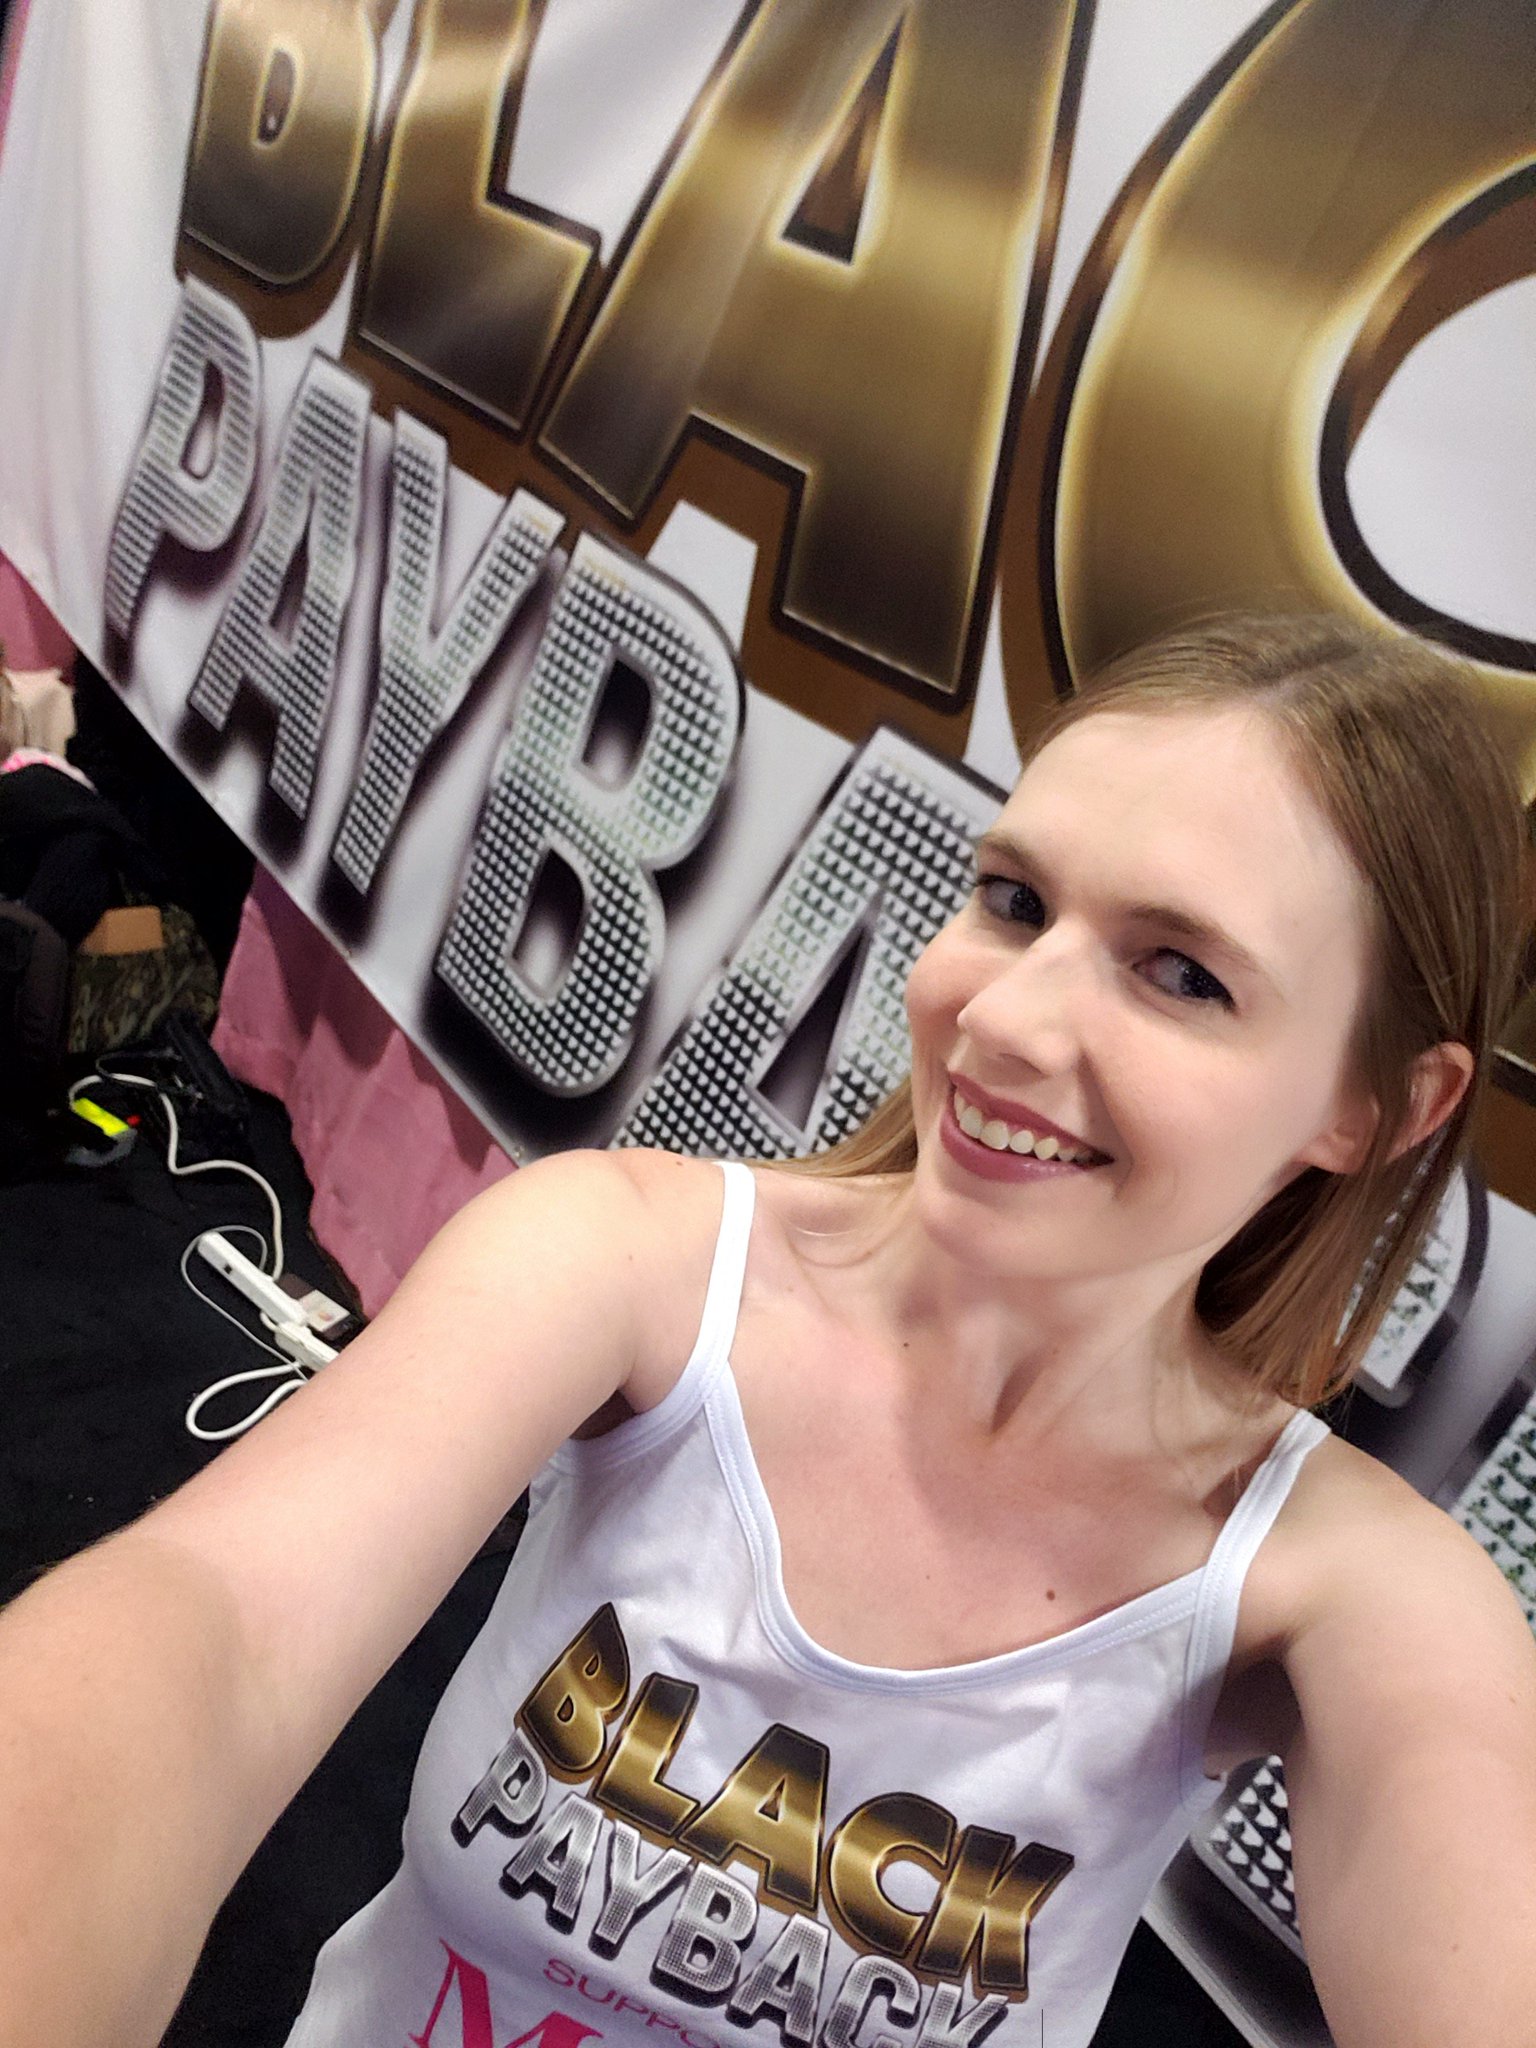 Rebel Rhyder 💖 Exxxotica Miami on Twitter: "Come visit me tonight at ...